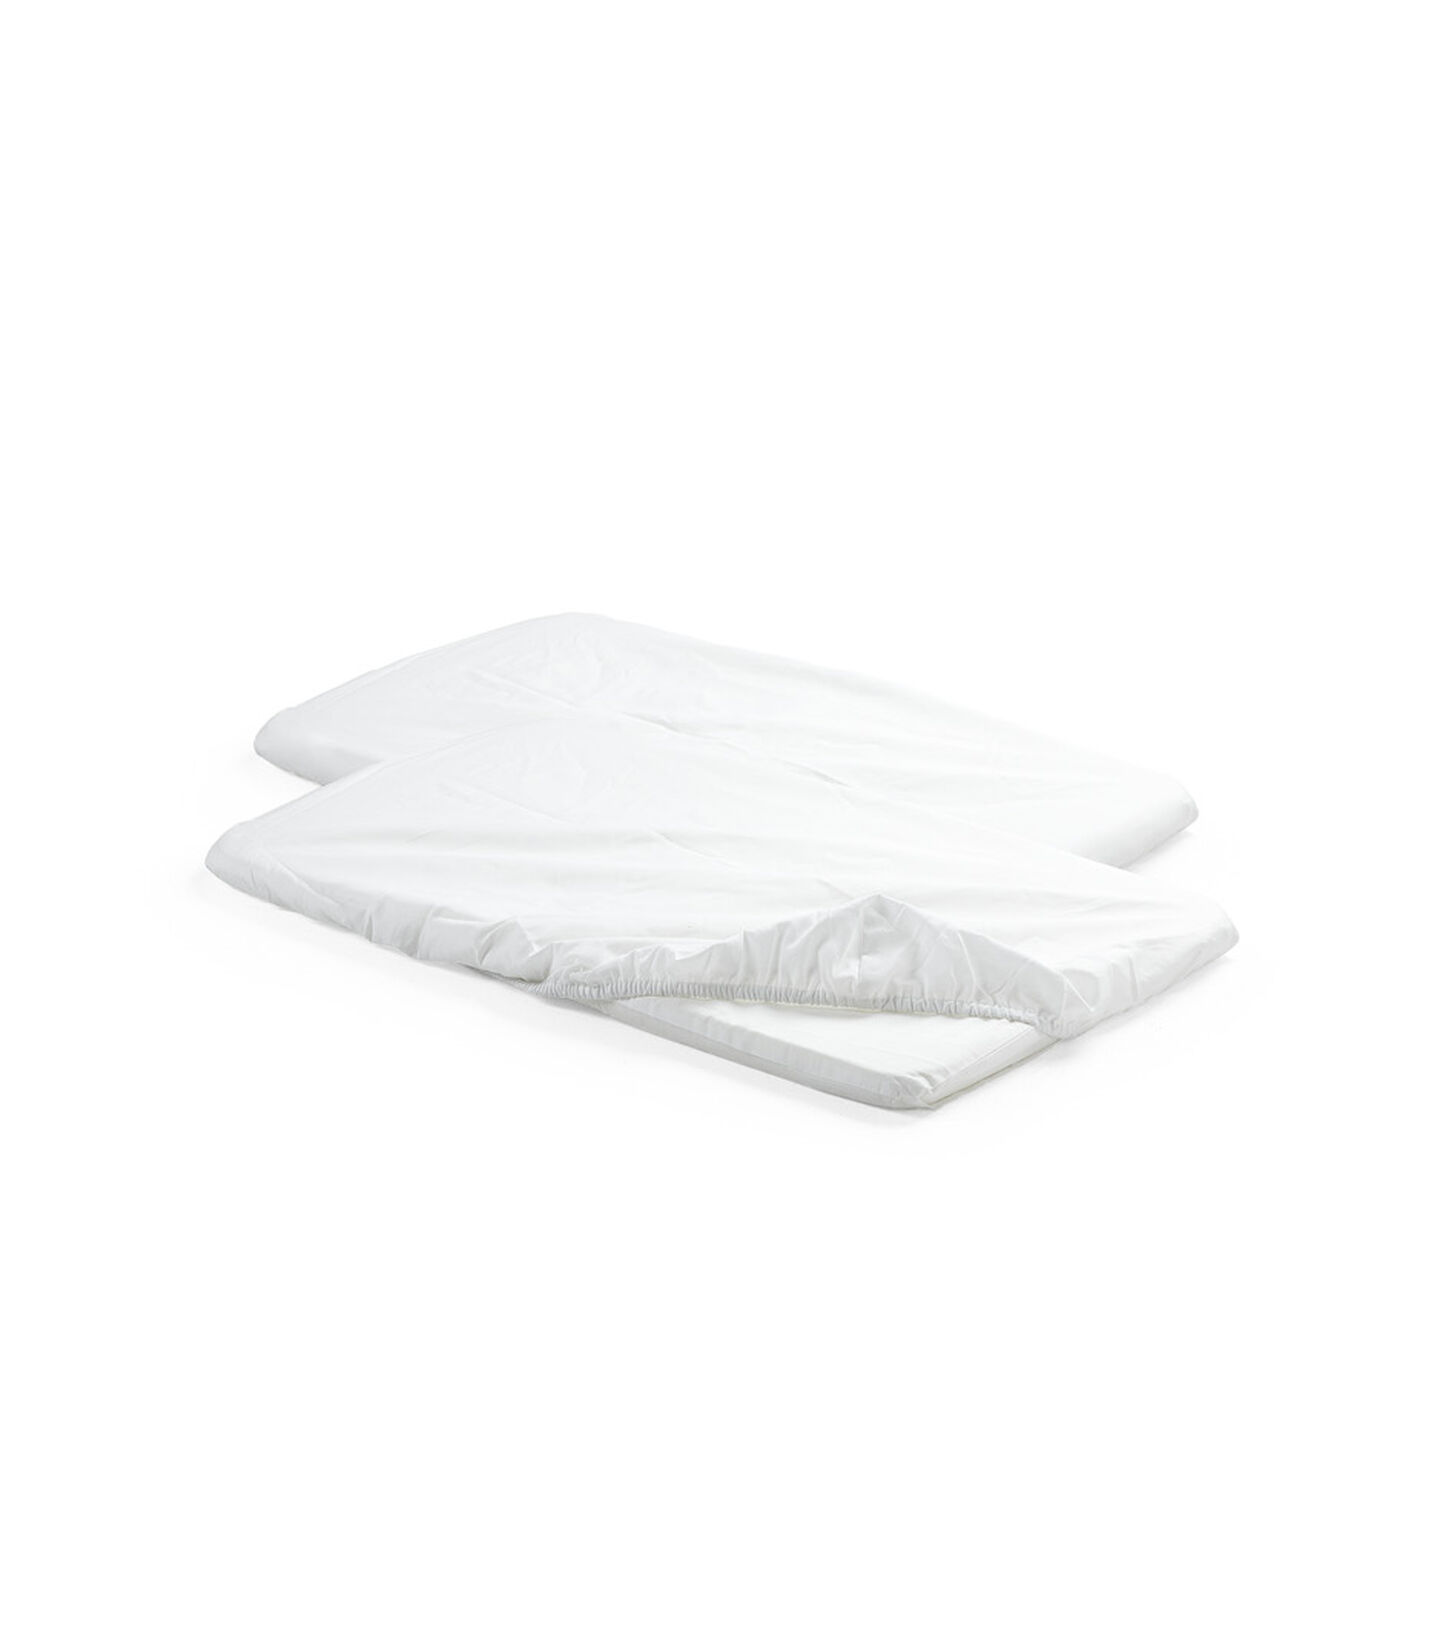 Stokke® Home™ Cradle Fitted Sheet 2pc White, White, mainview view 1